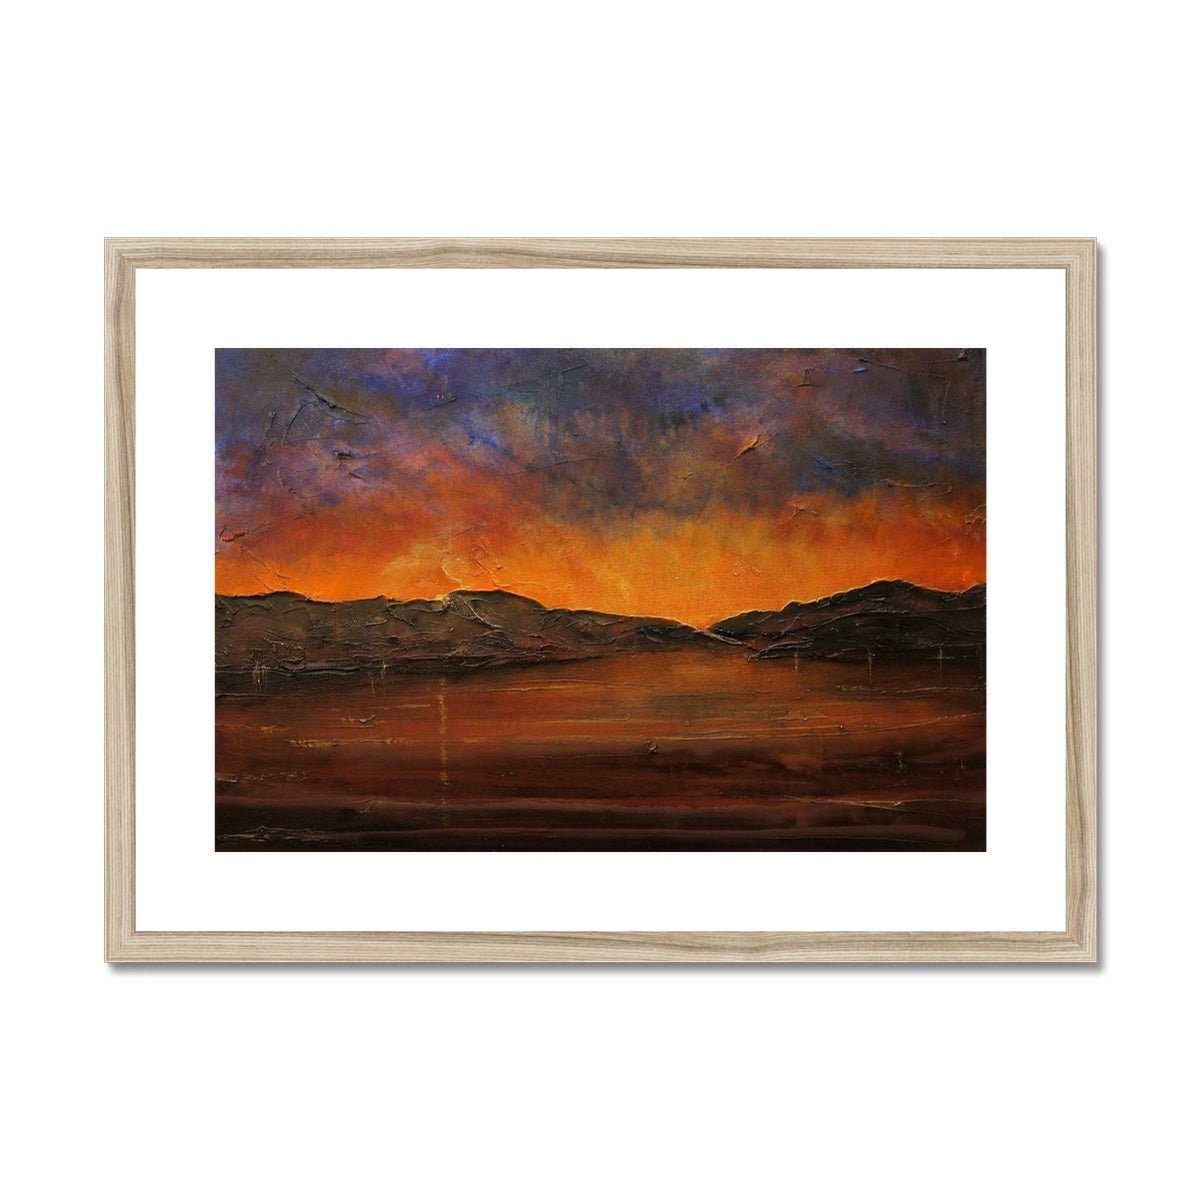 A Brooding River Clyde Dusk Painting | Framed & Mounted Prints From Scotland-Framed & Mounted Prints-River Clyde Art Gallery-A2 Landscape-Natural Frame-Paintings, Prints, Homeware, Art Gifts From Scotland By Scottish Artist Kevin Hunter